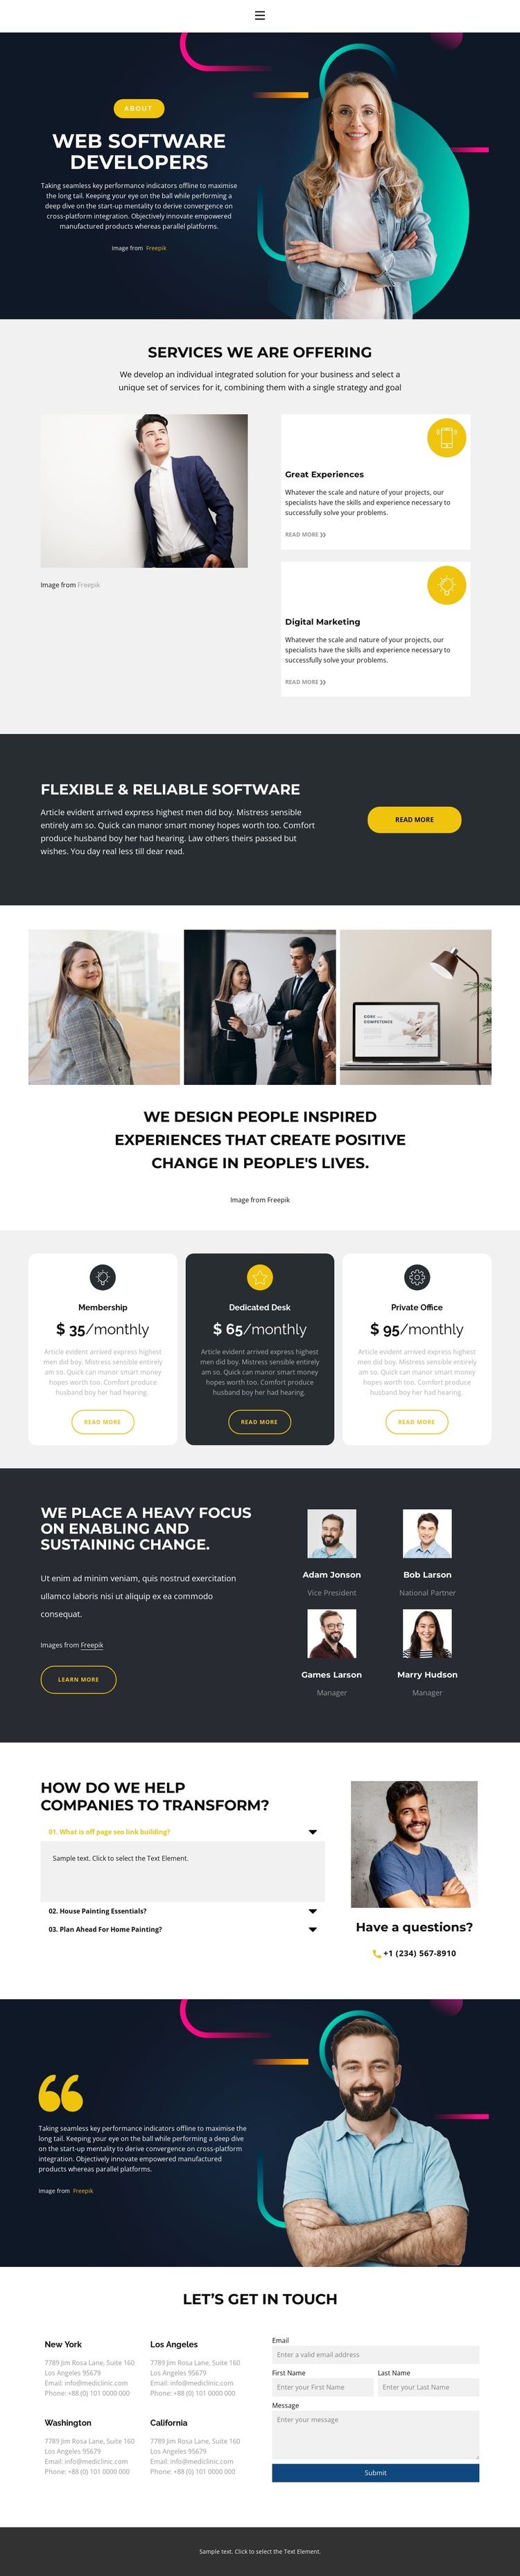 Professional and enthusiastic HTML5 Template